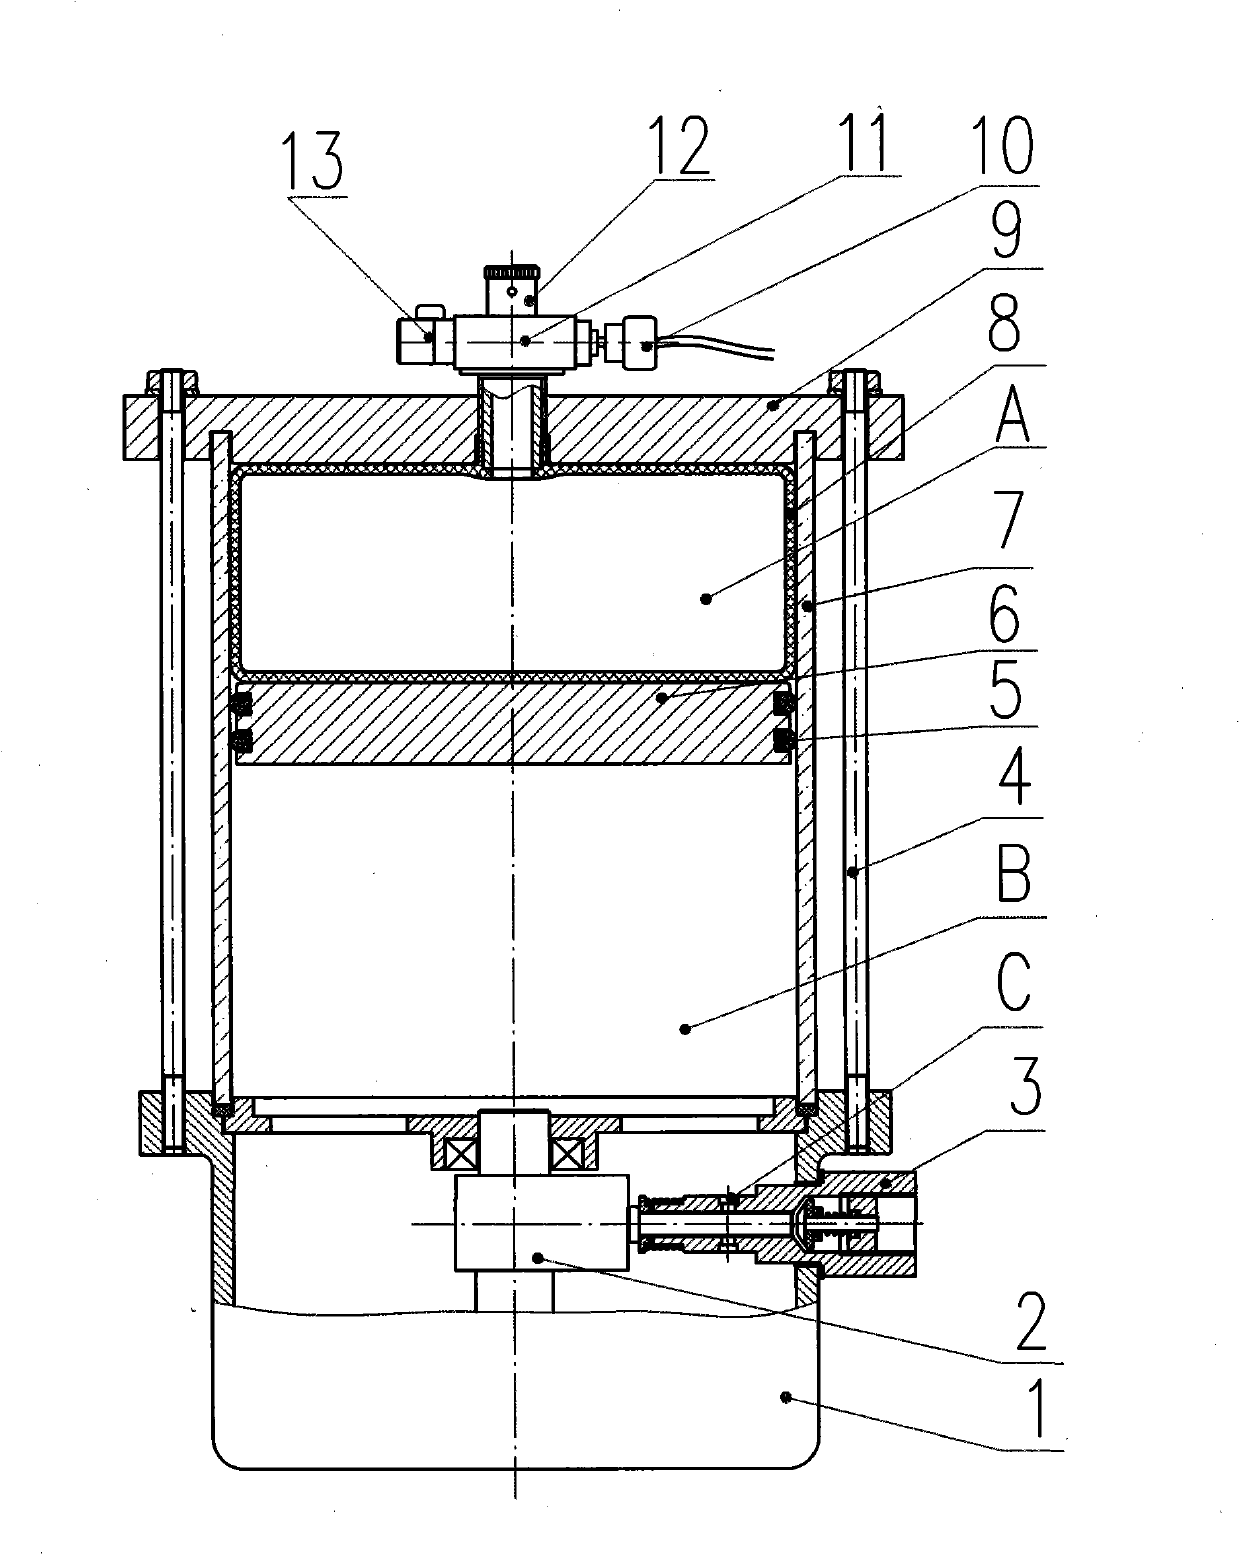 Lubricating device with pneumatic tire pressure oil tank